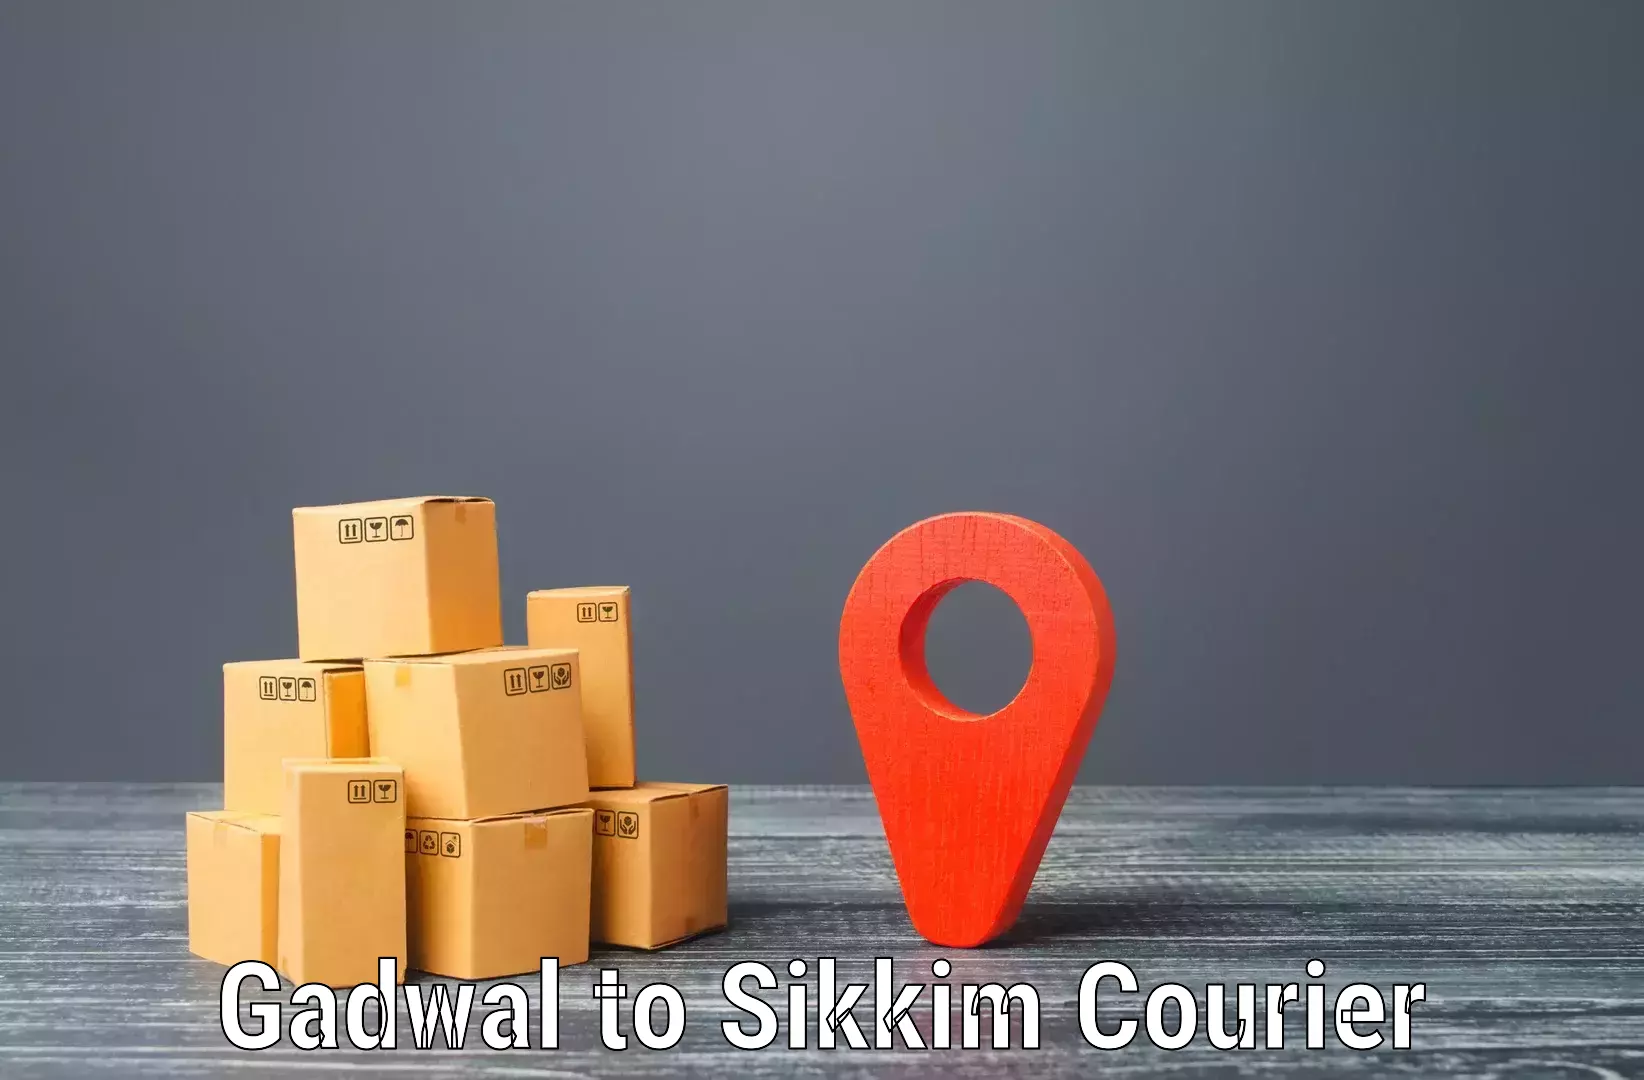 Advanced shipping services Gadwal to Geyzing